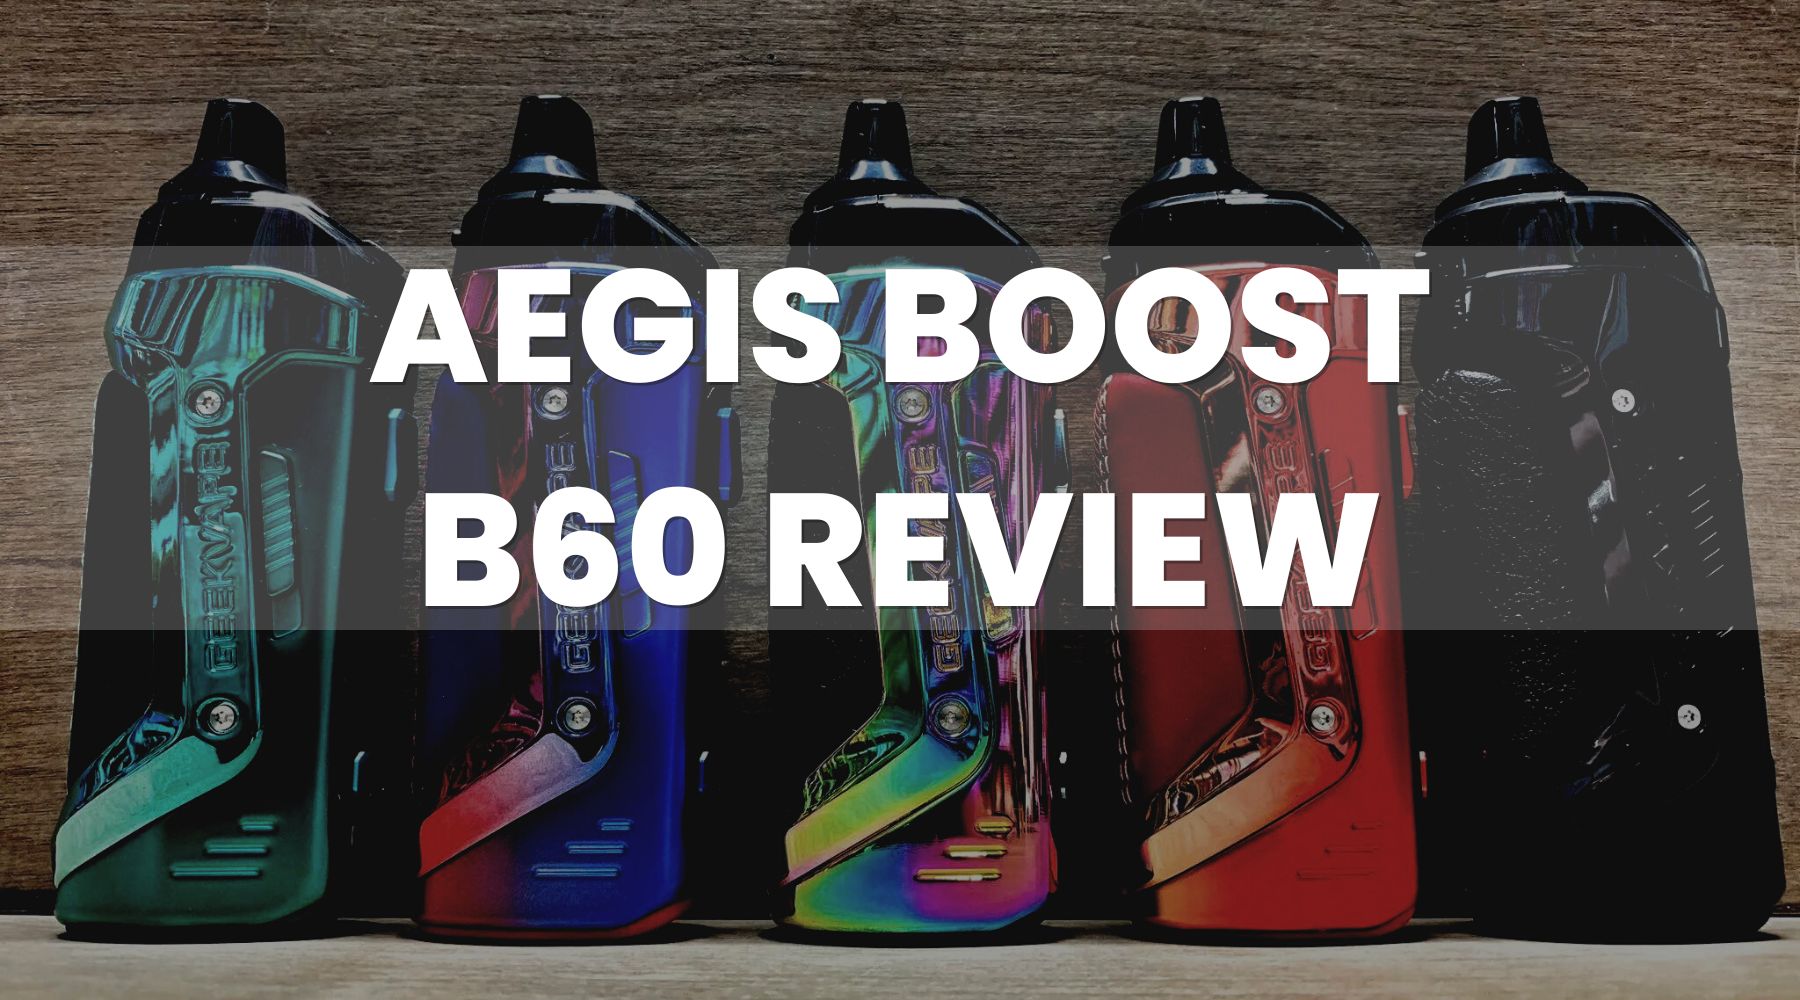 The Ultimate GeekVape Aegis Boost V2 (B60) Review